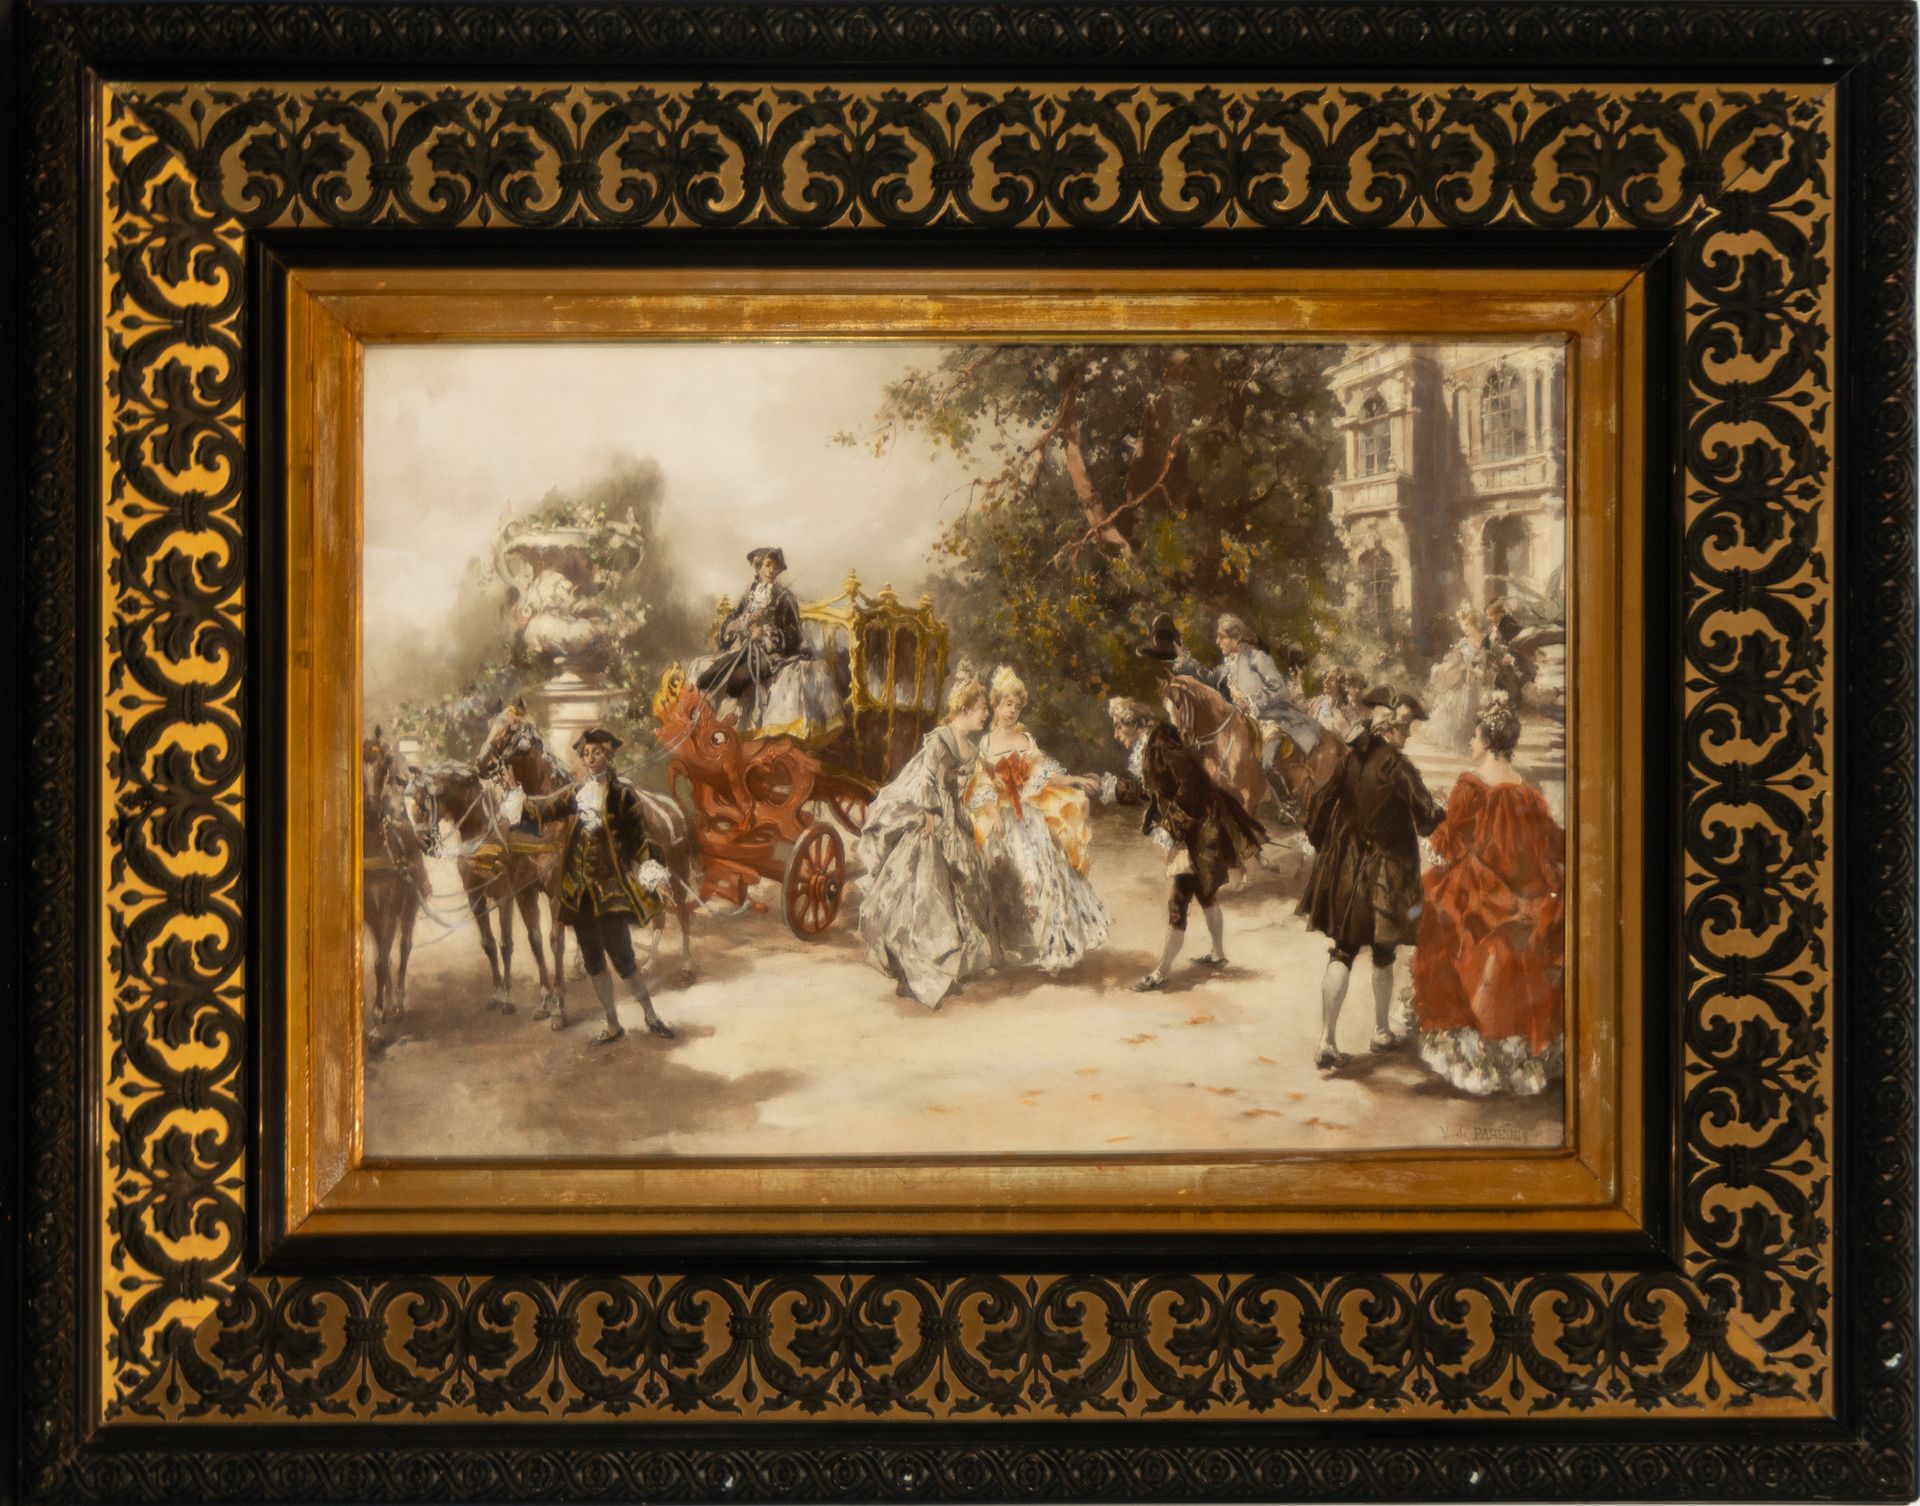 Gallant Scene with Ladies in a Carriage, Spanish romanticist school of the 19th century, signed V. d